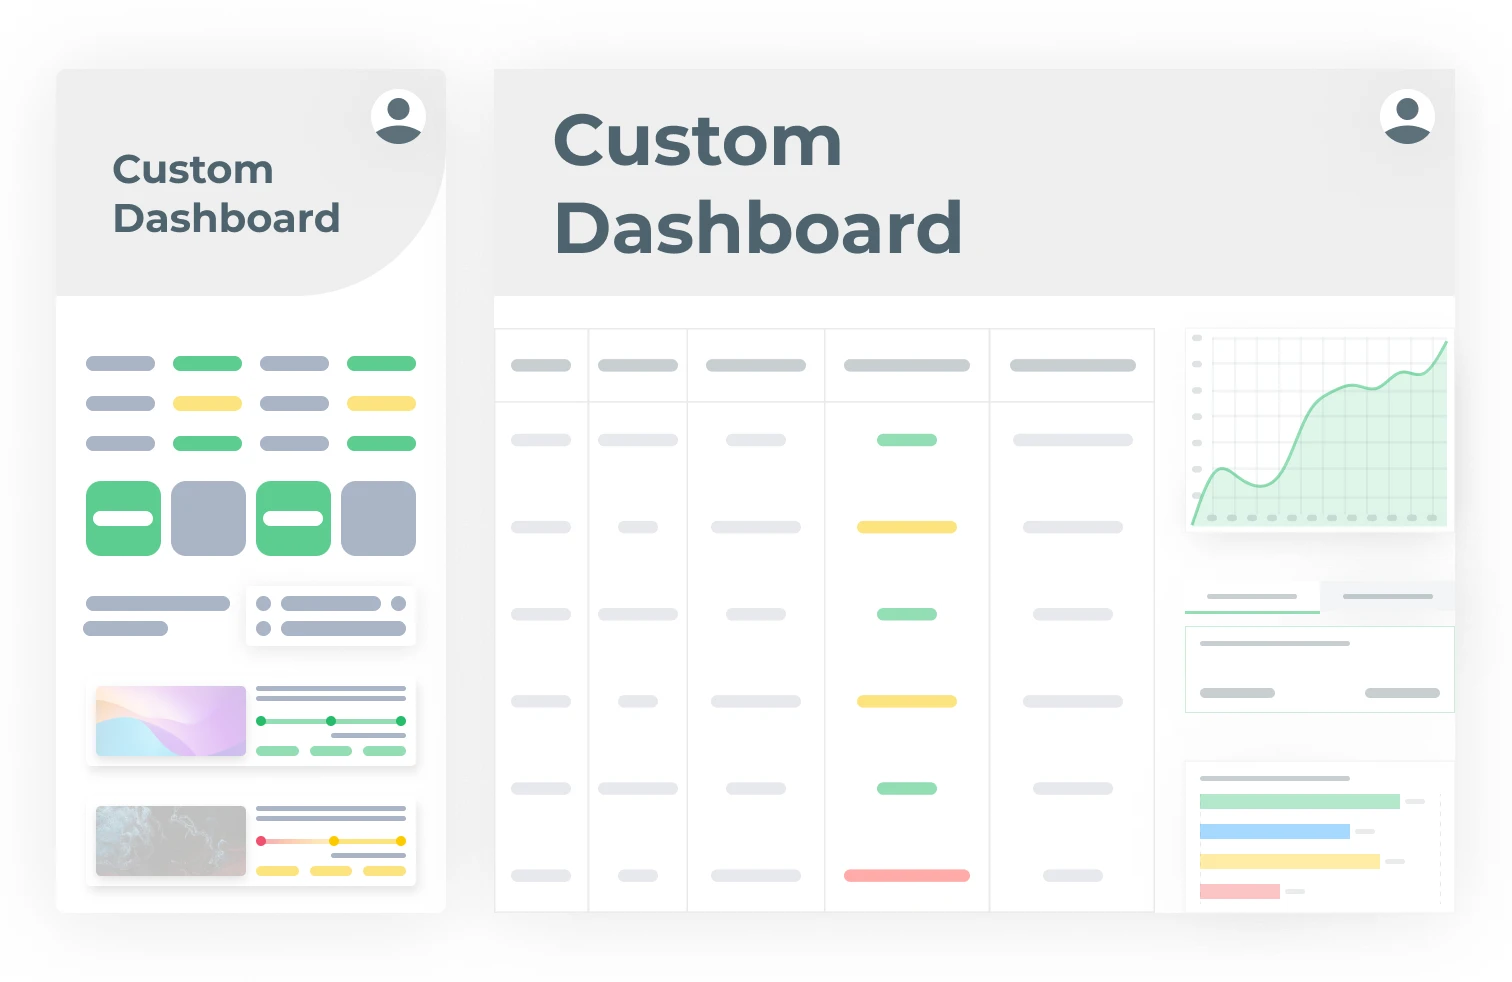 Get started building your Stripe revenue dashboard today